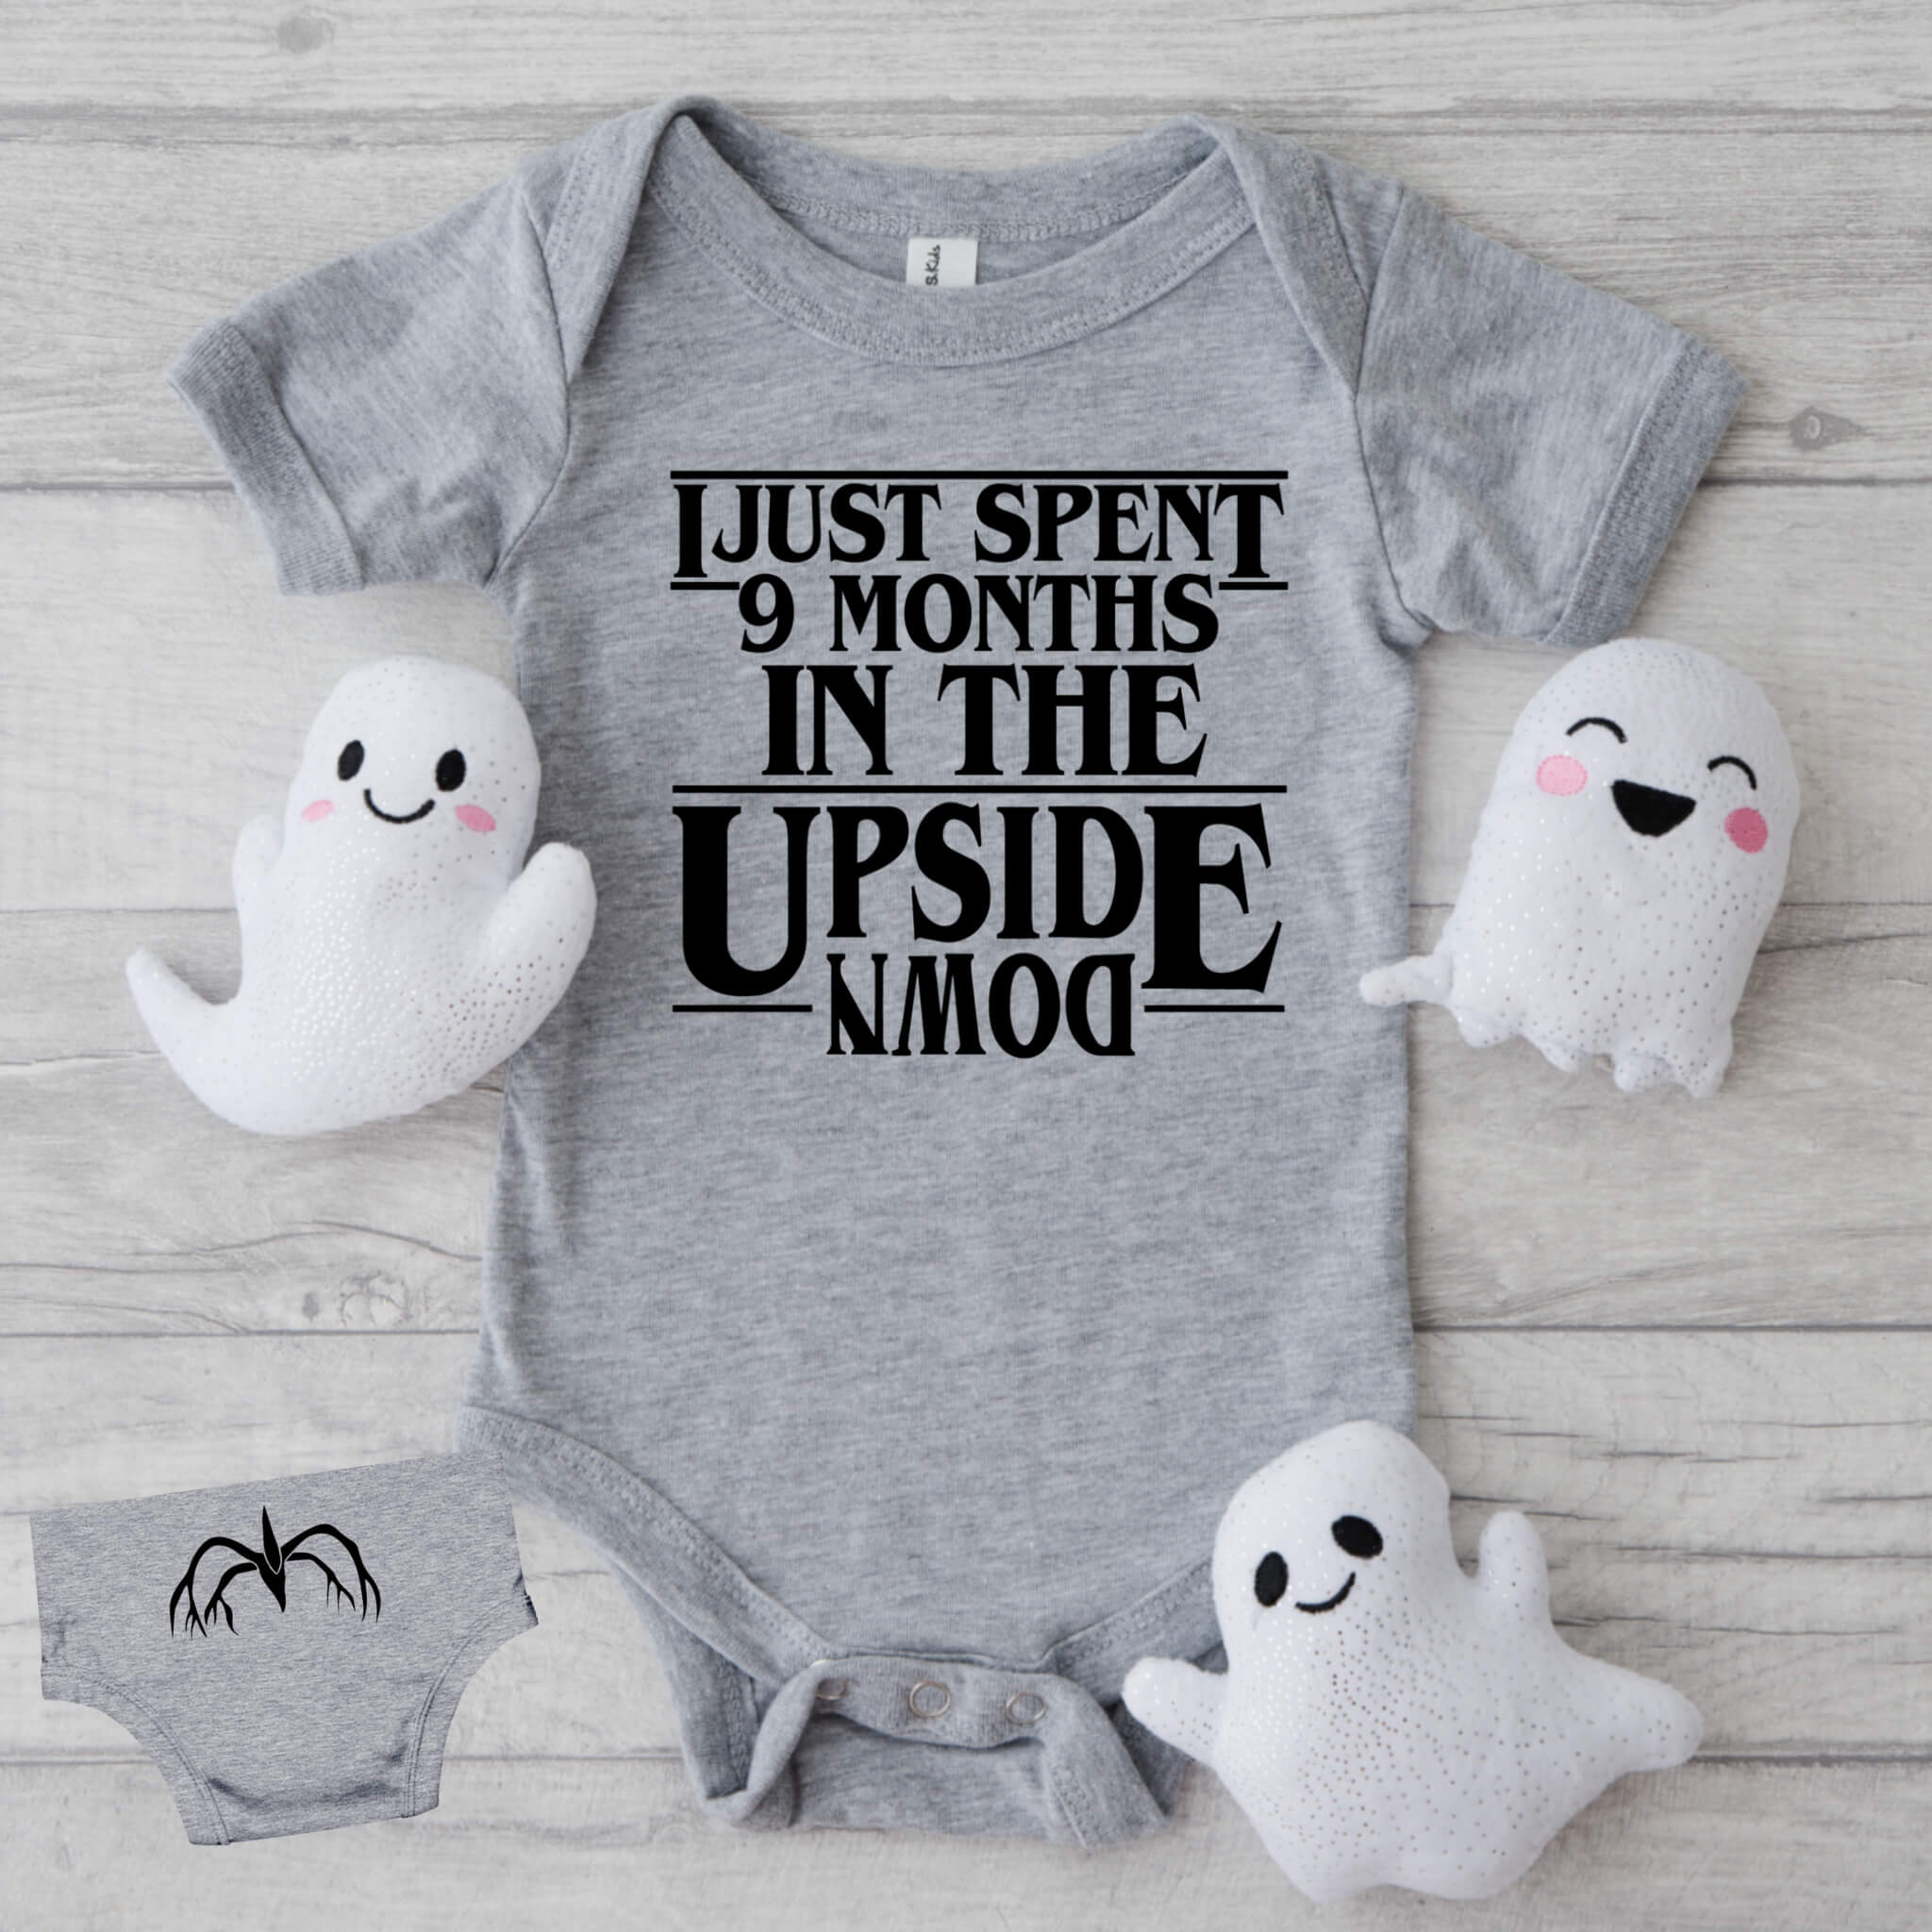 New Baby Onesie, I Just Spent 9 Months In The Upside Down